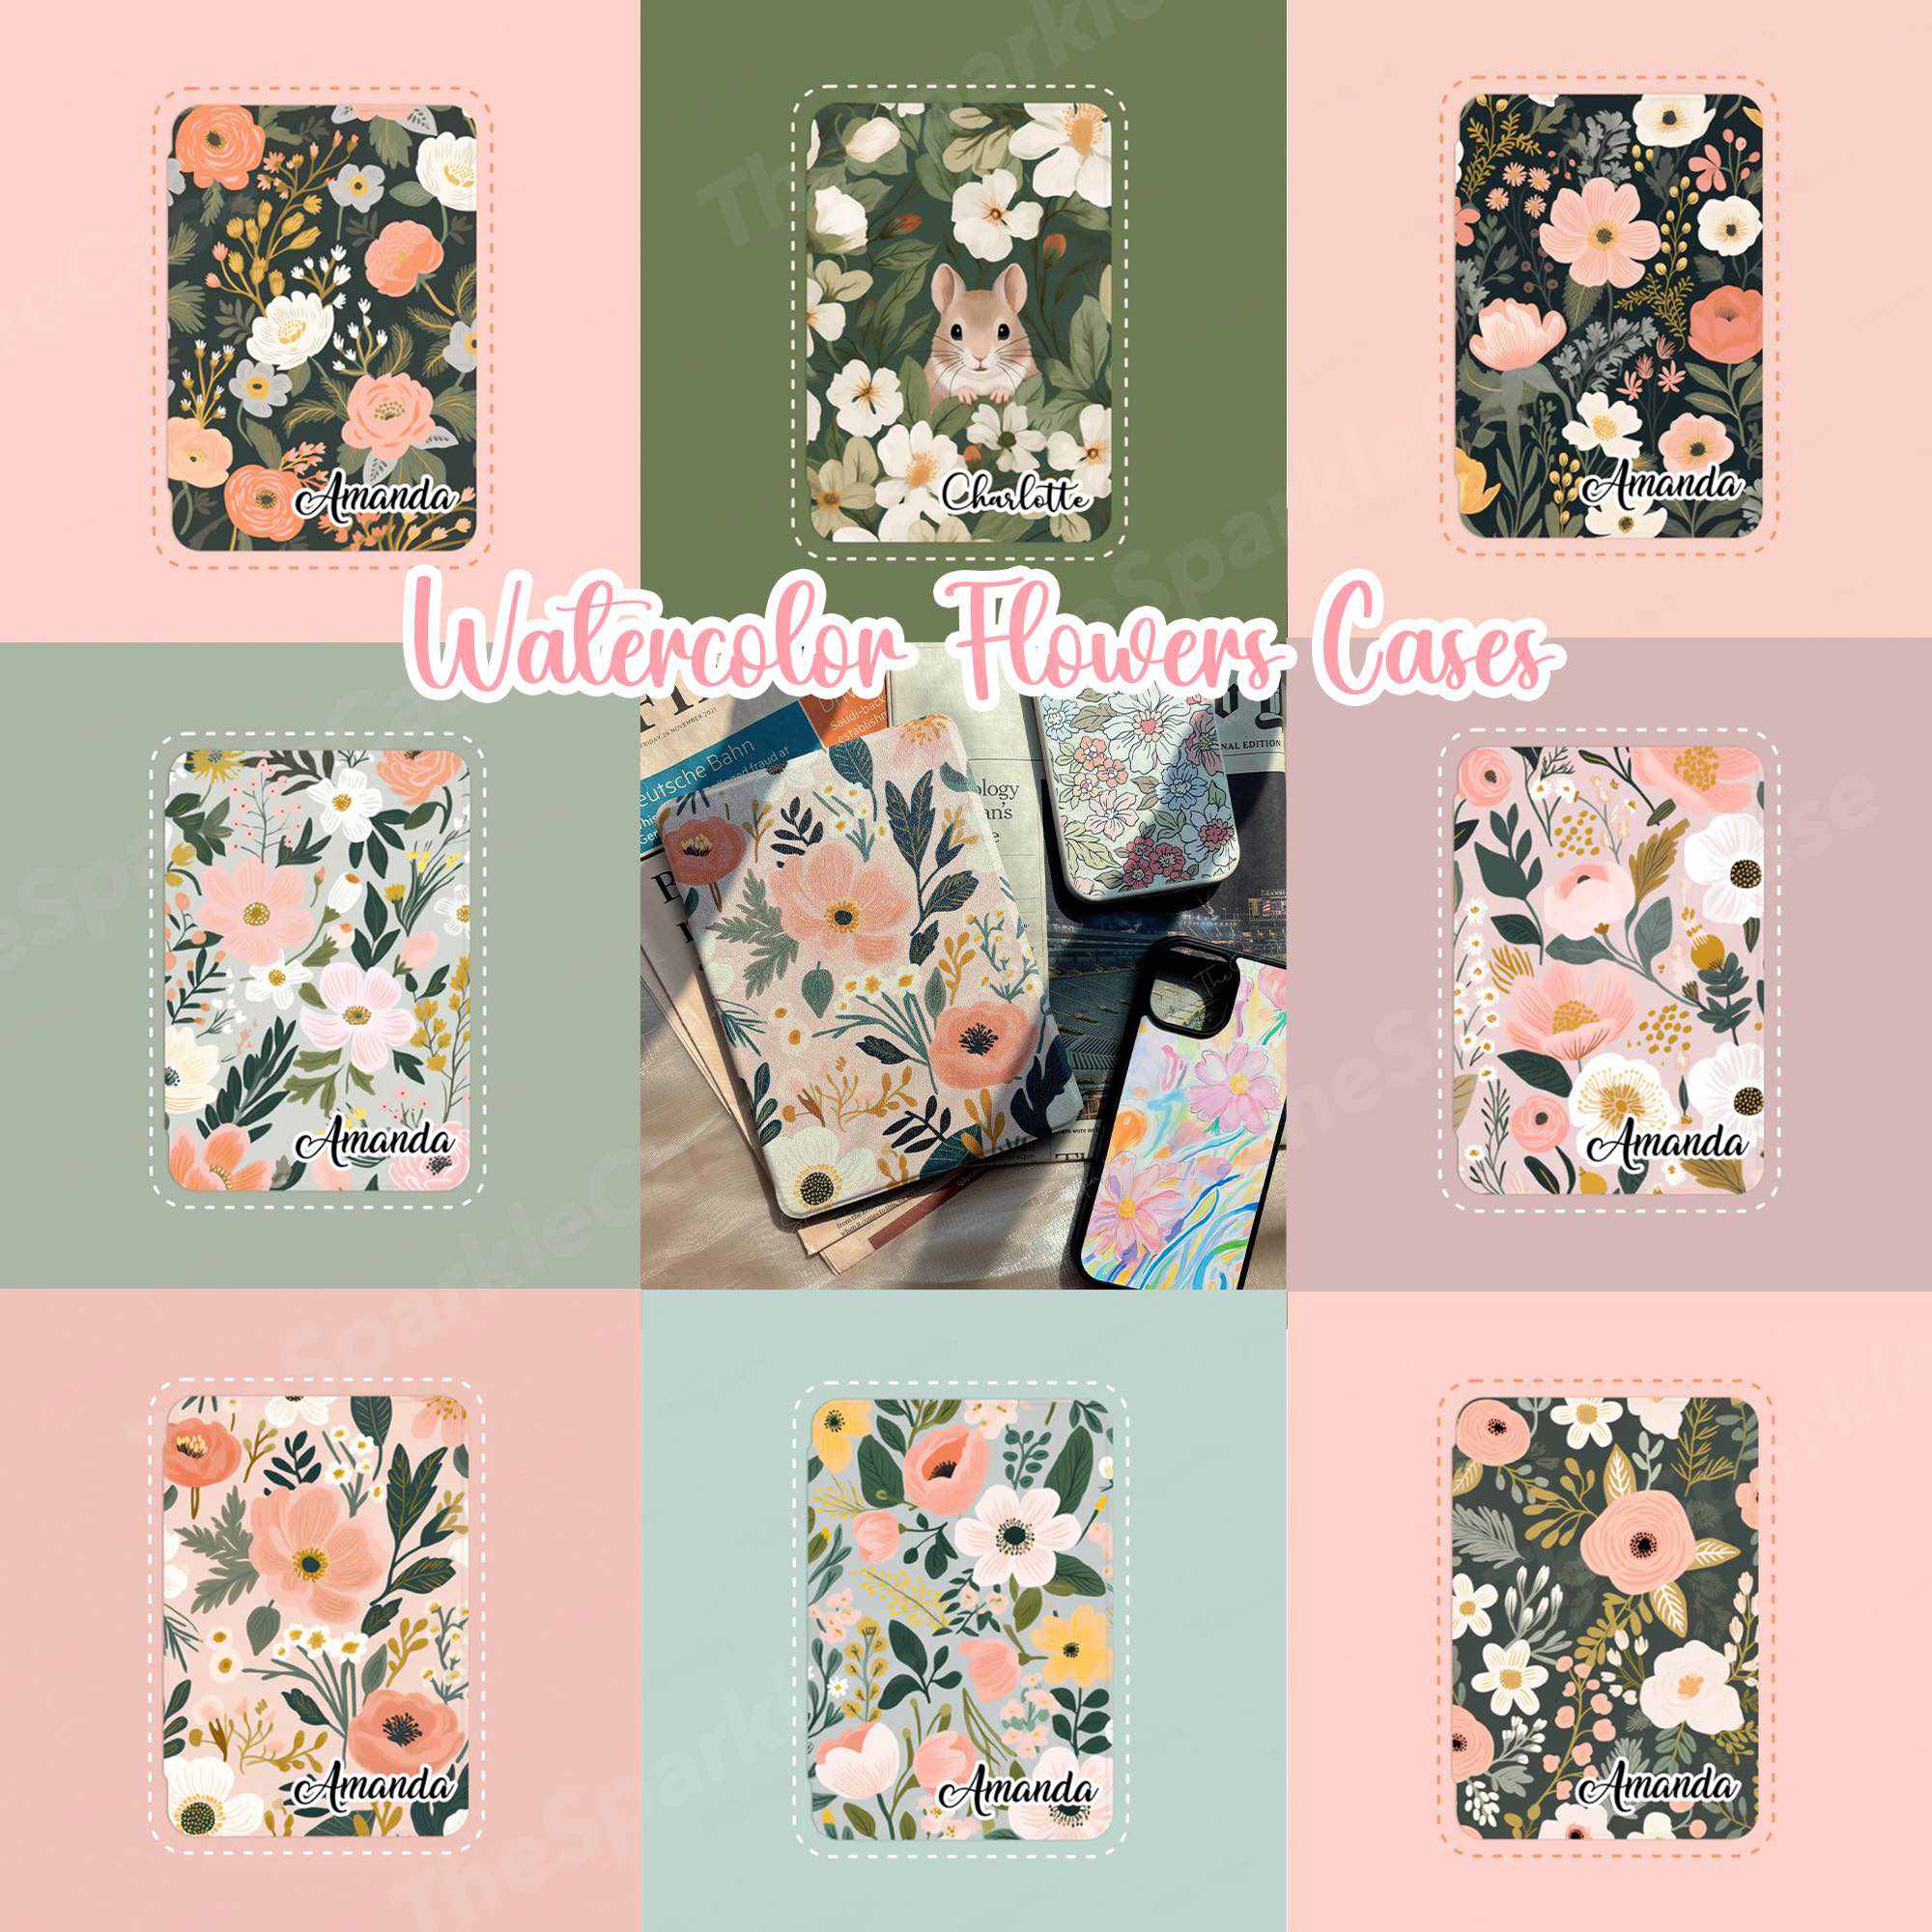 Personalized Aesthetic Floral Kindle Case Paperwhite Cover Free Personalization